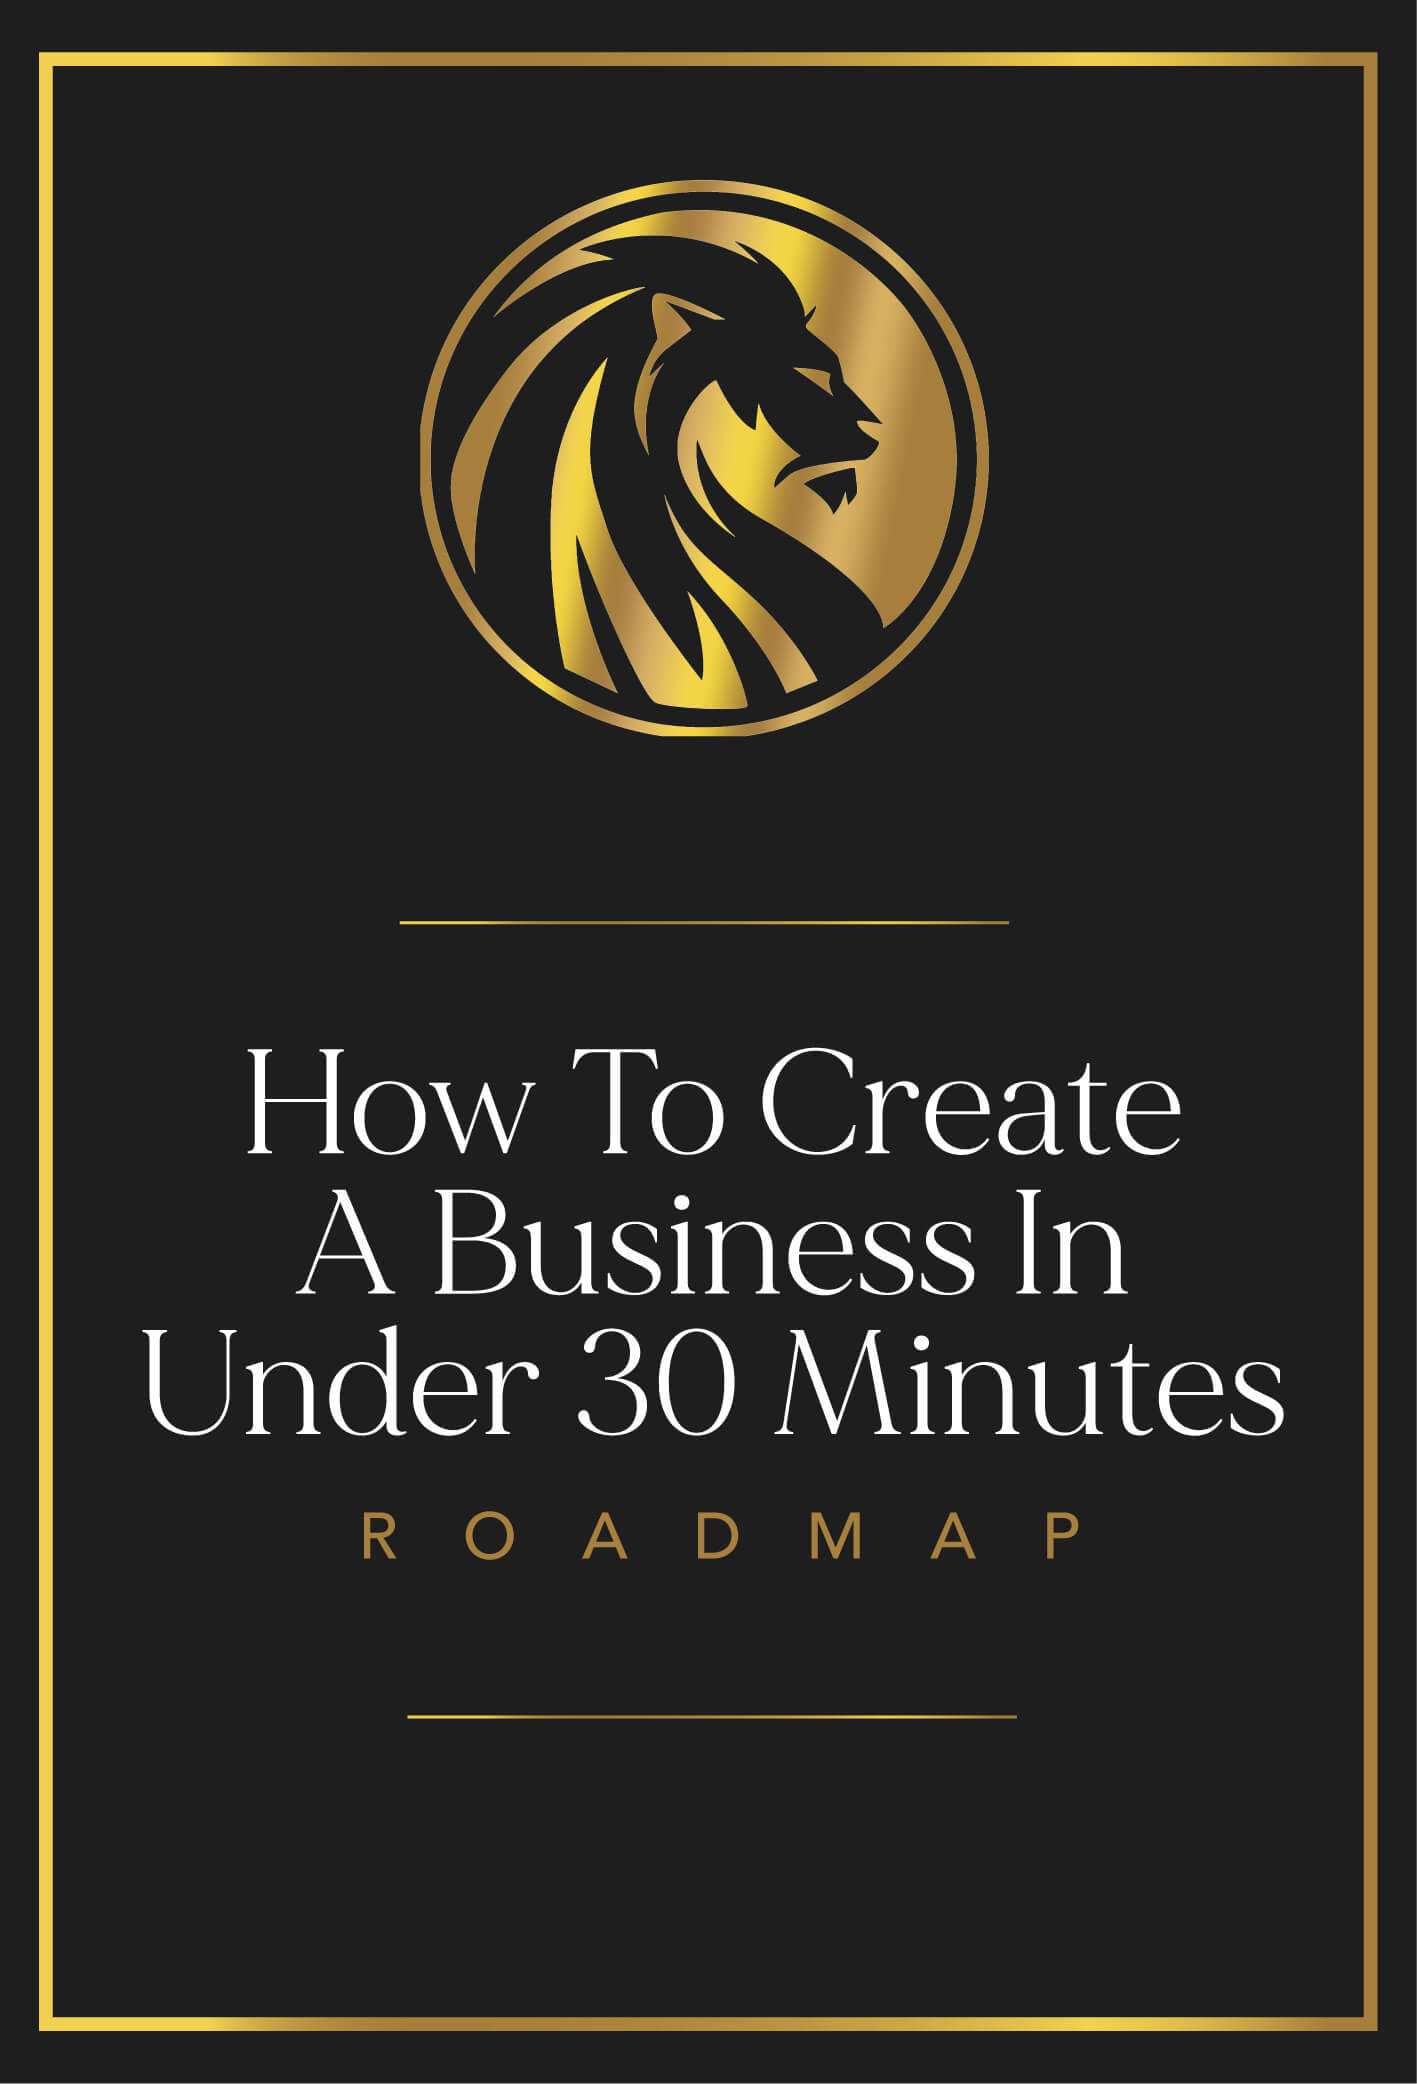 HOW TO CREATE A BUSINESS IN UNDER 30 MINUTES